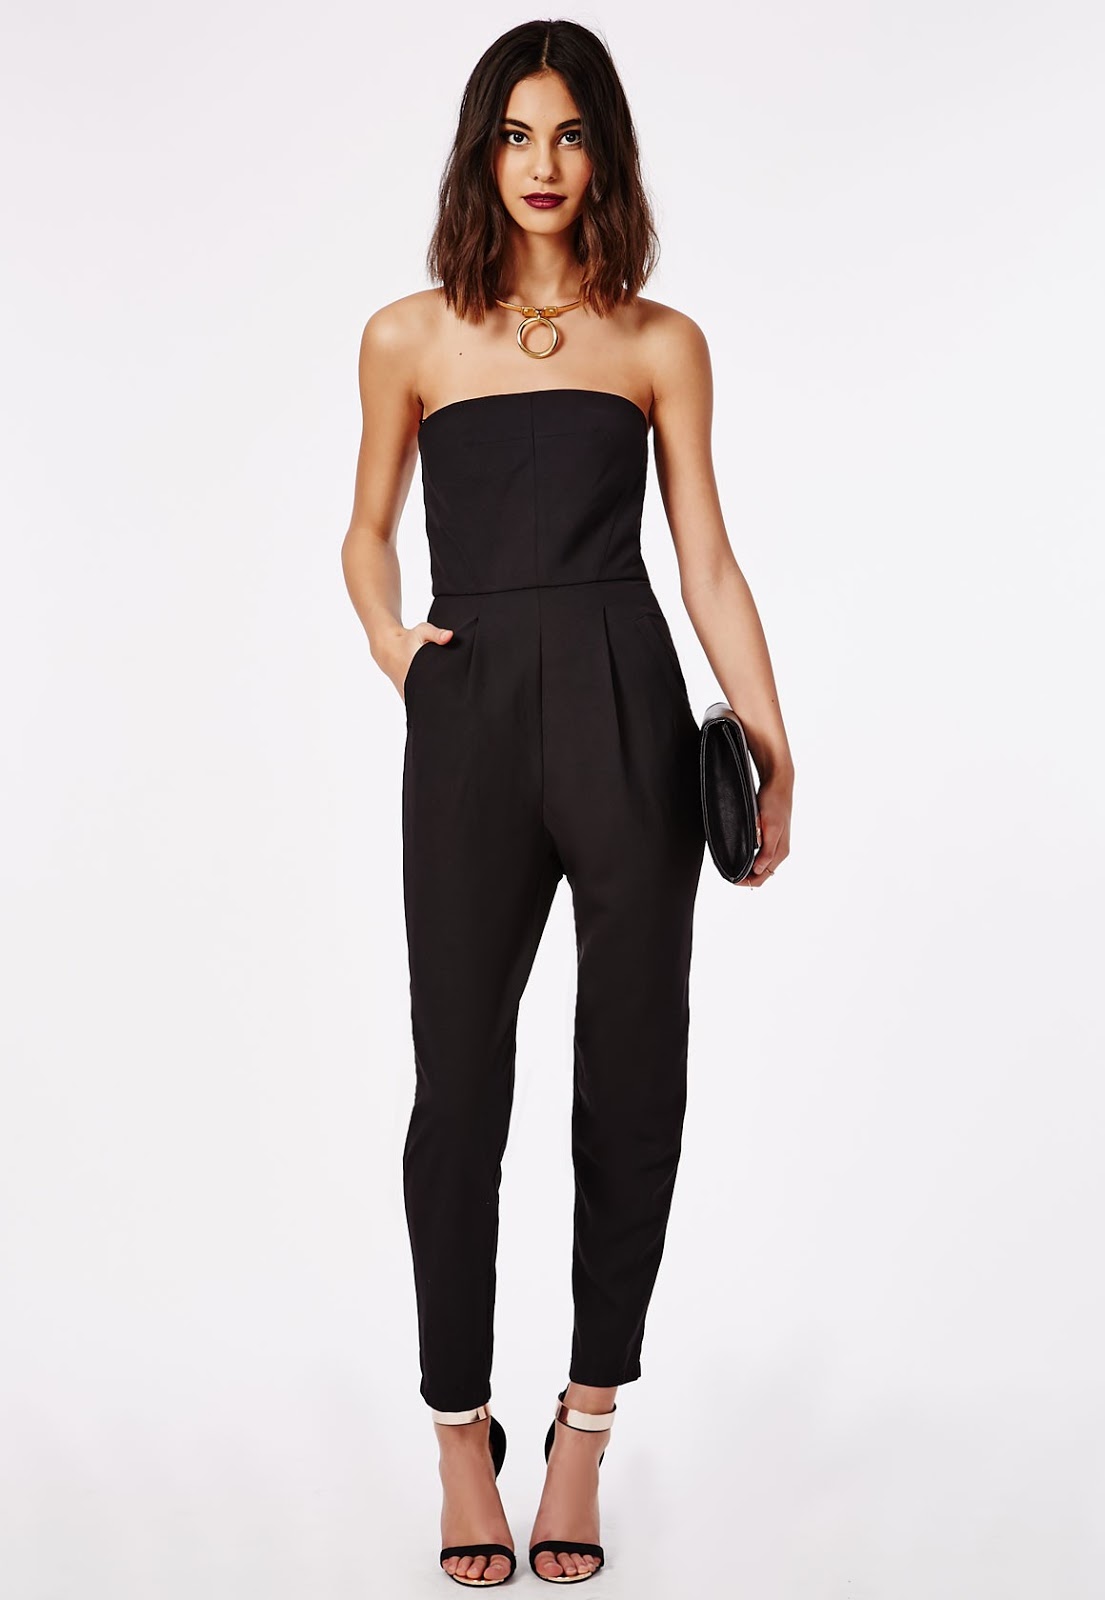 LUXE Models Blog: How to Pull Off a Jumpsuit